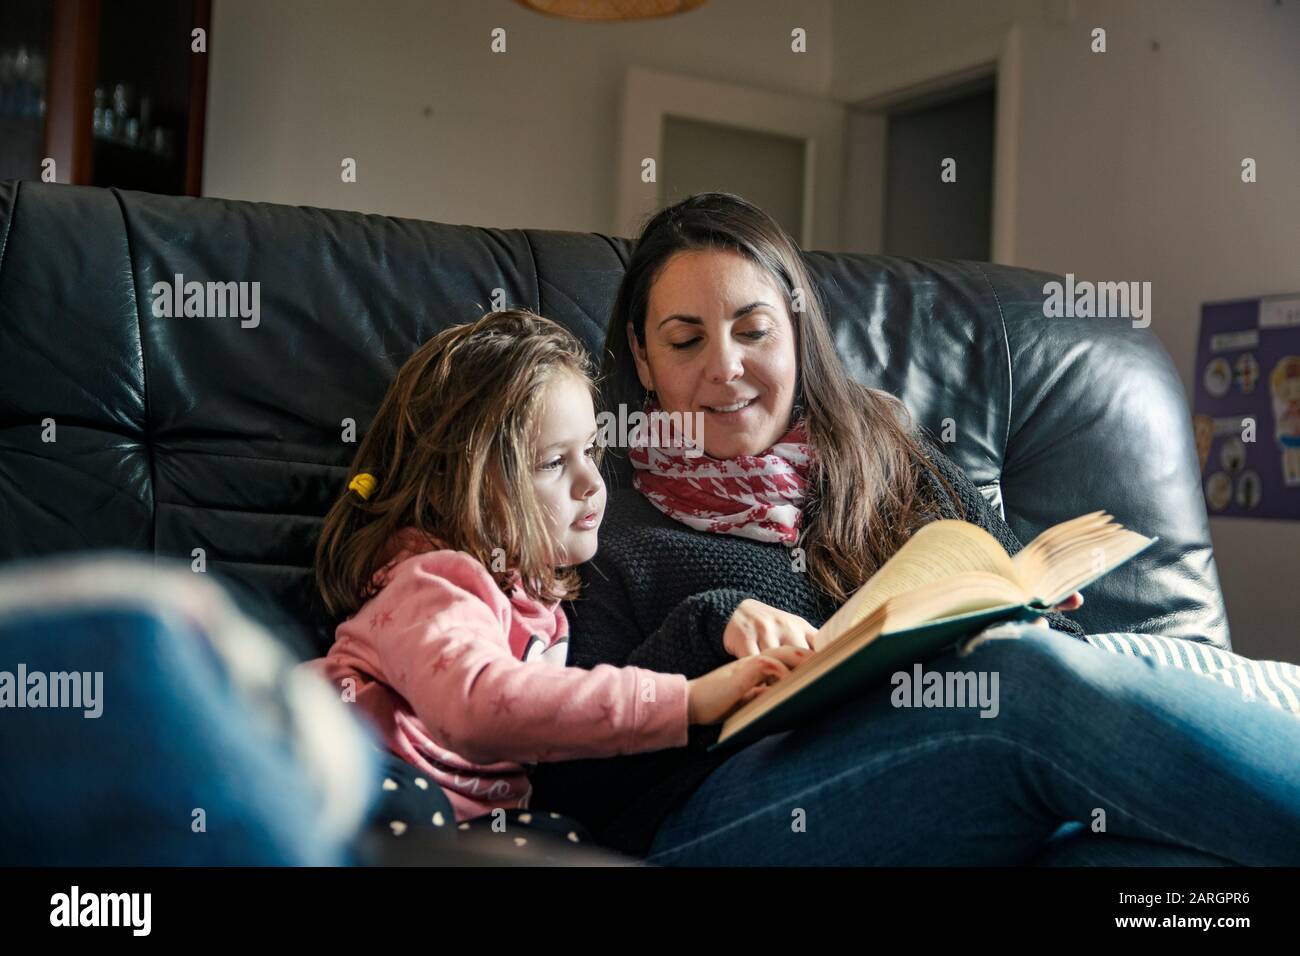 Single parent family concept. Mother and daughter reading a book on the sofa in the living room. Empty copy space for Editor's text. Stock Photo